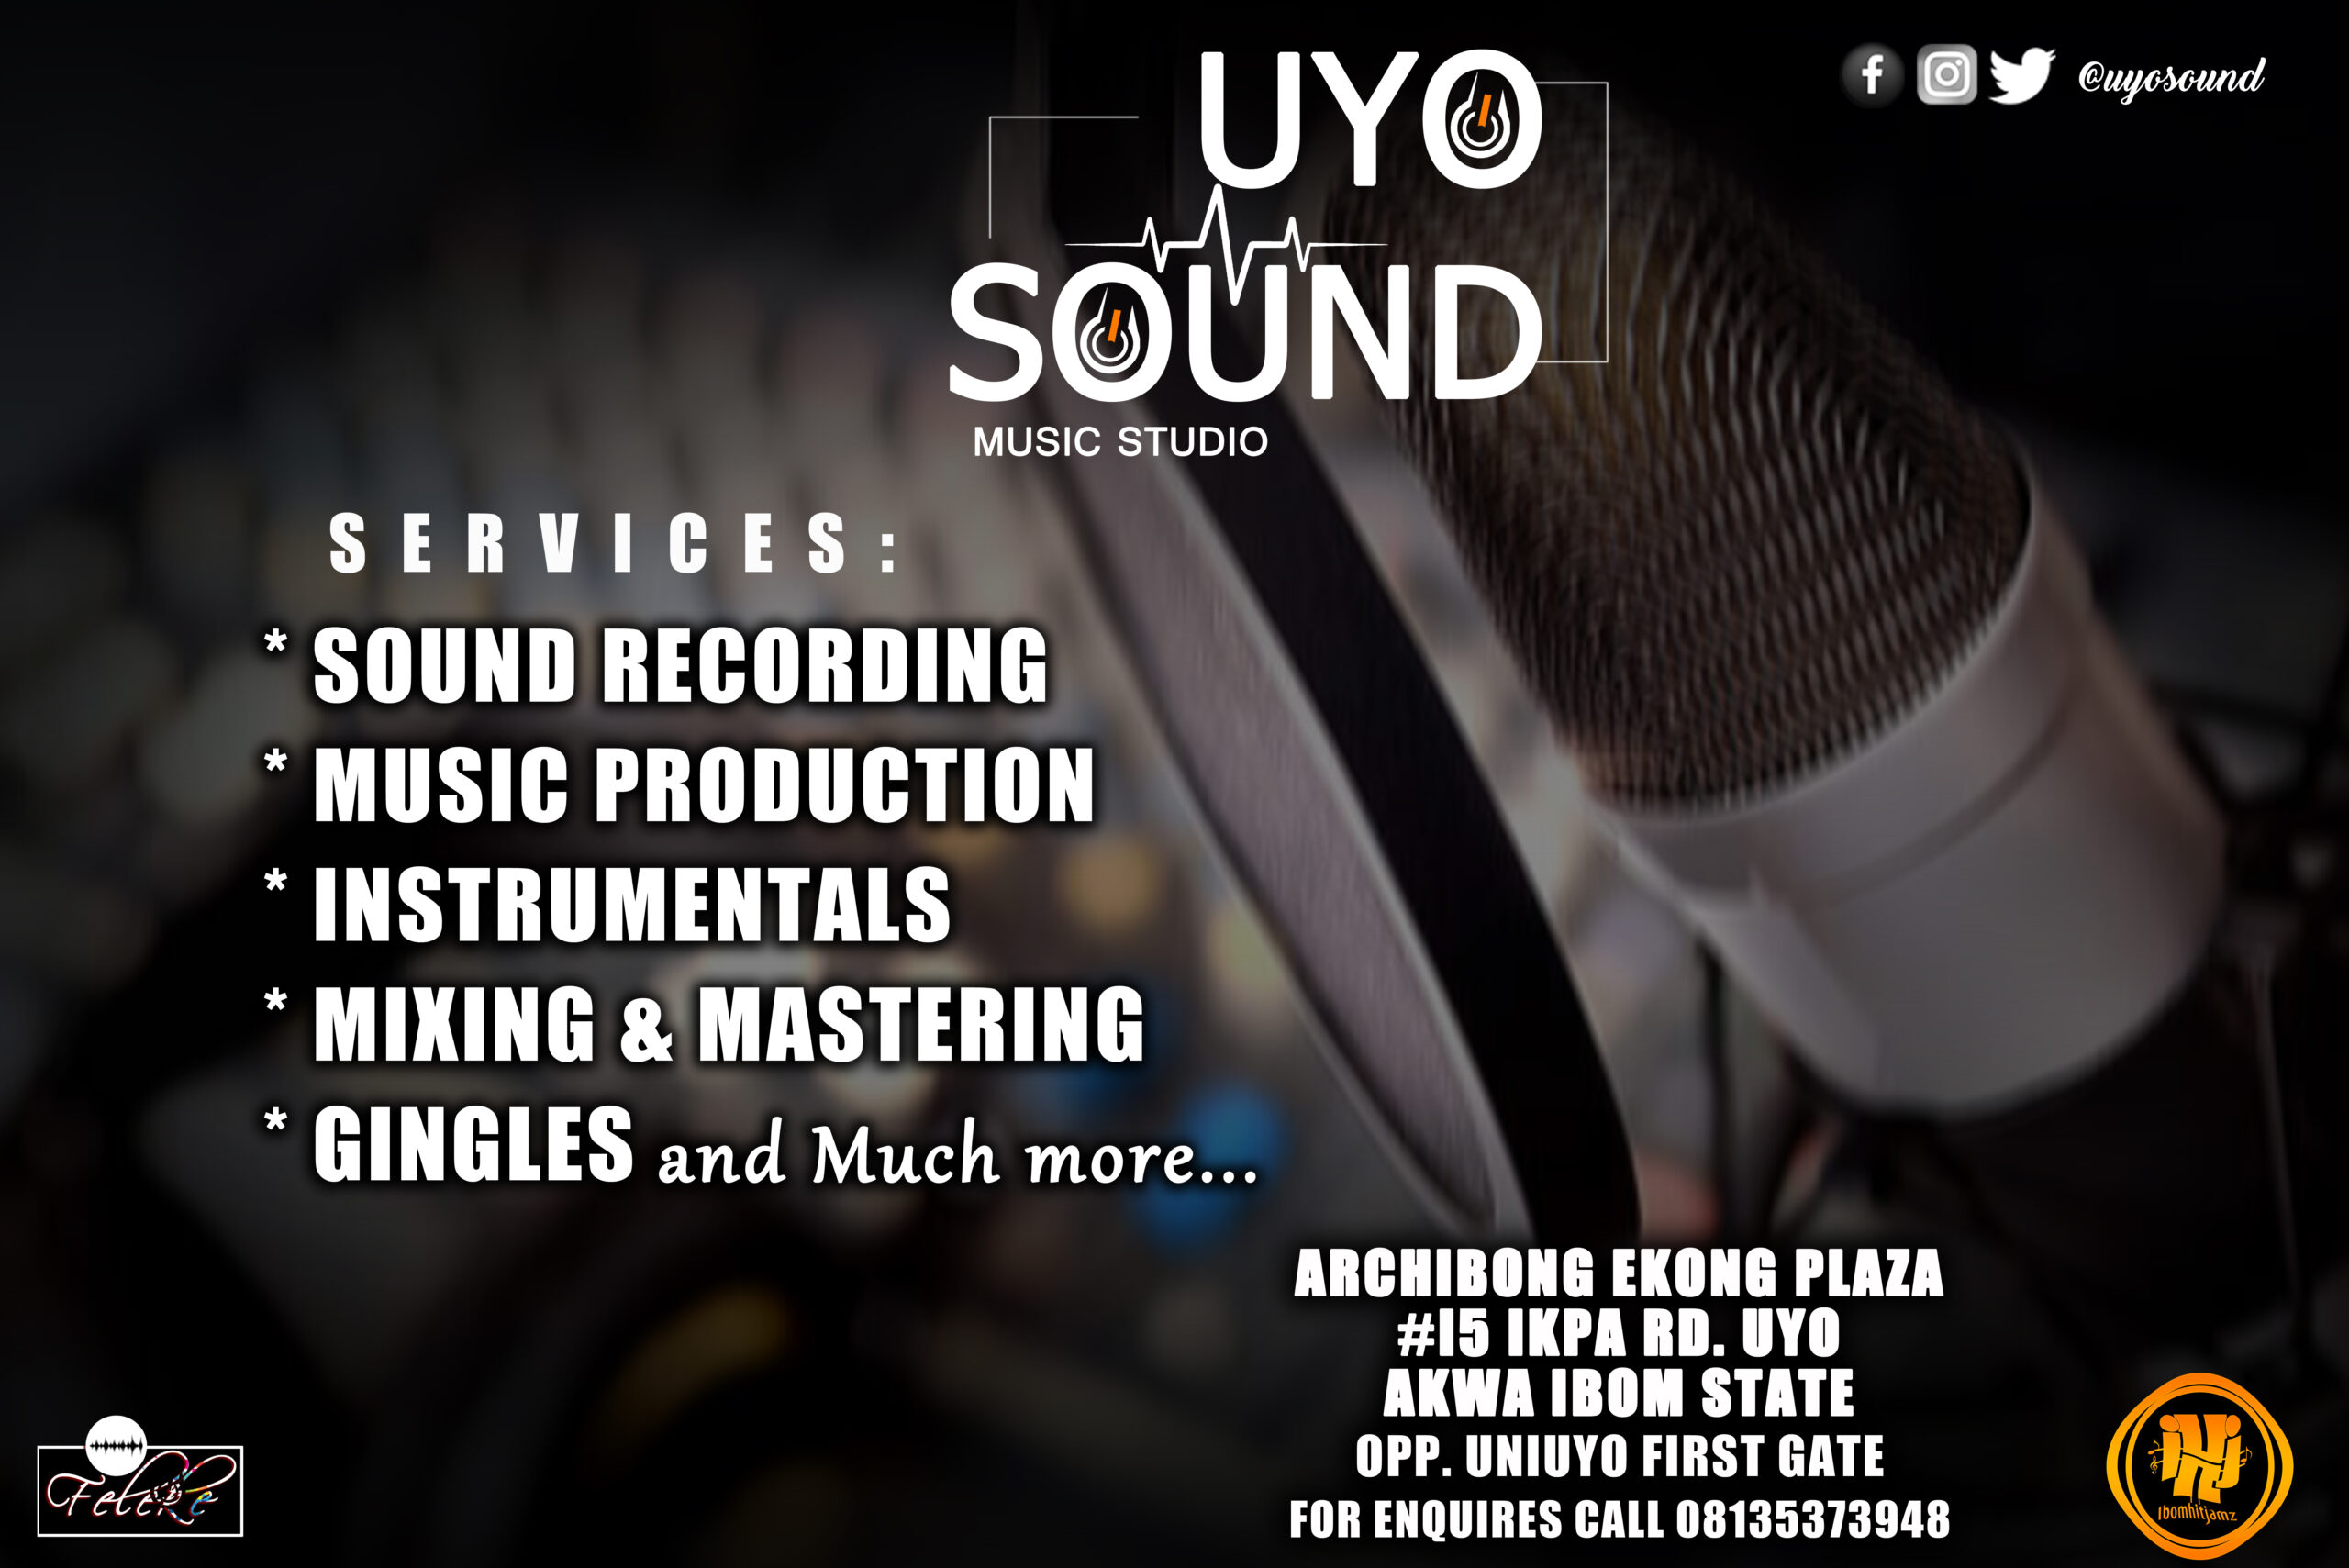 November Giveaway Promo Offer, Record A Track in Uyo Sound at N5,000 only